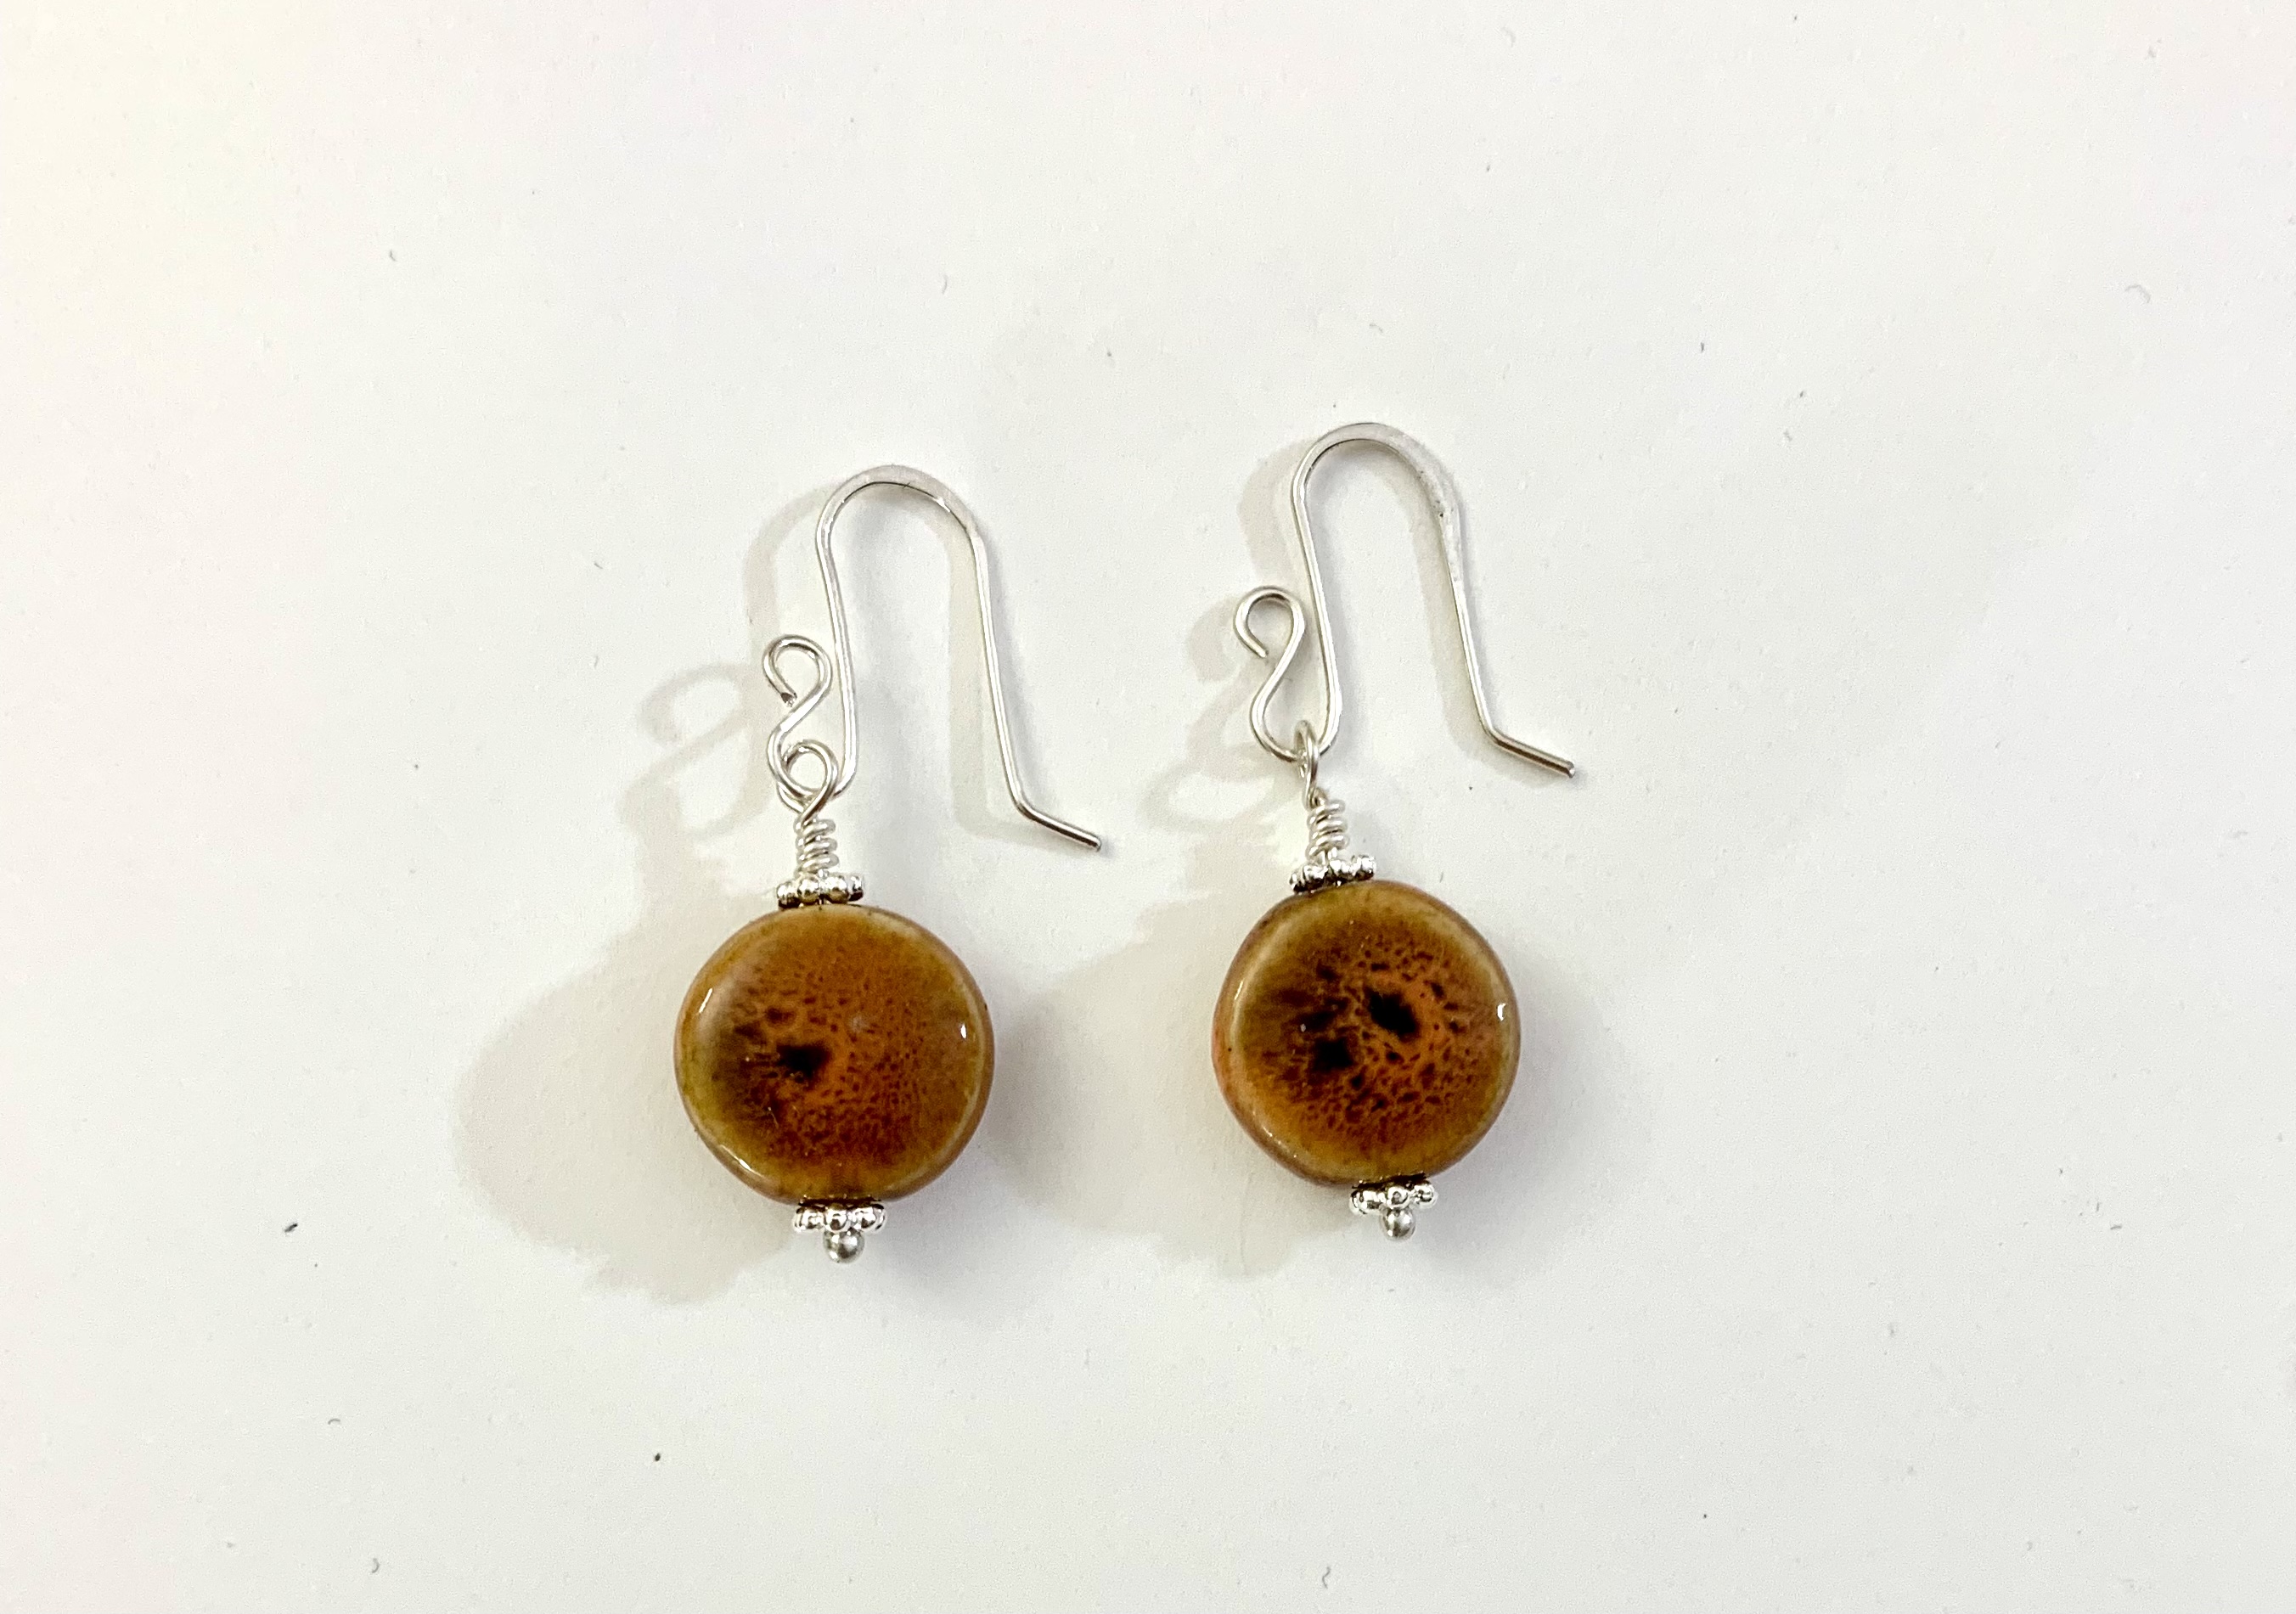 Porcelain and Argentium earrings